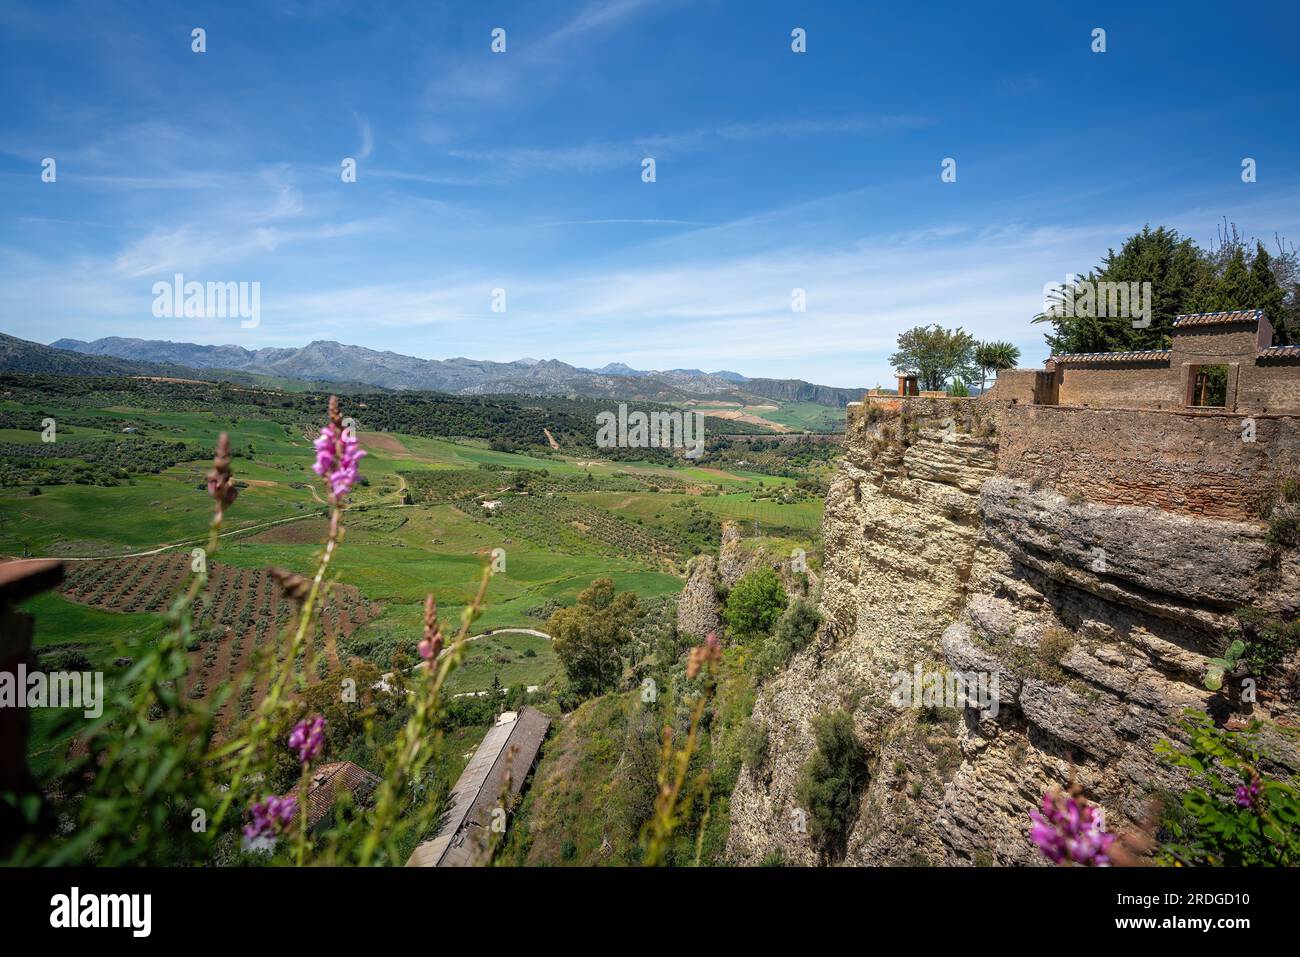 Aerial view of Ronda with Sierra de Libar Mountains - Ronda, Andalusia, Spain Stock Photo